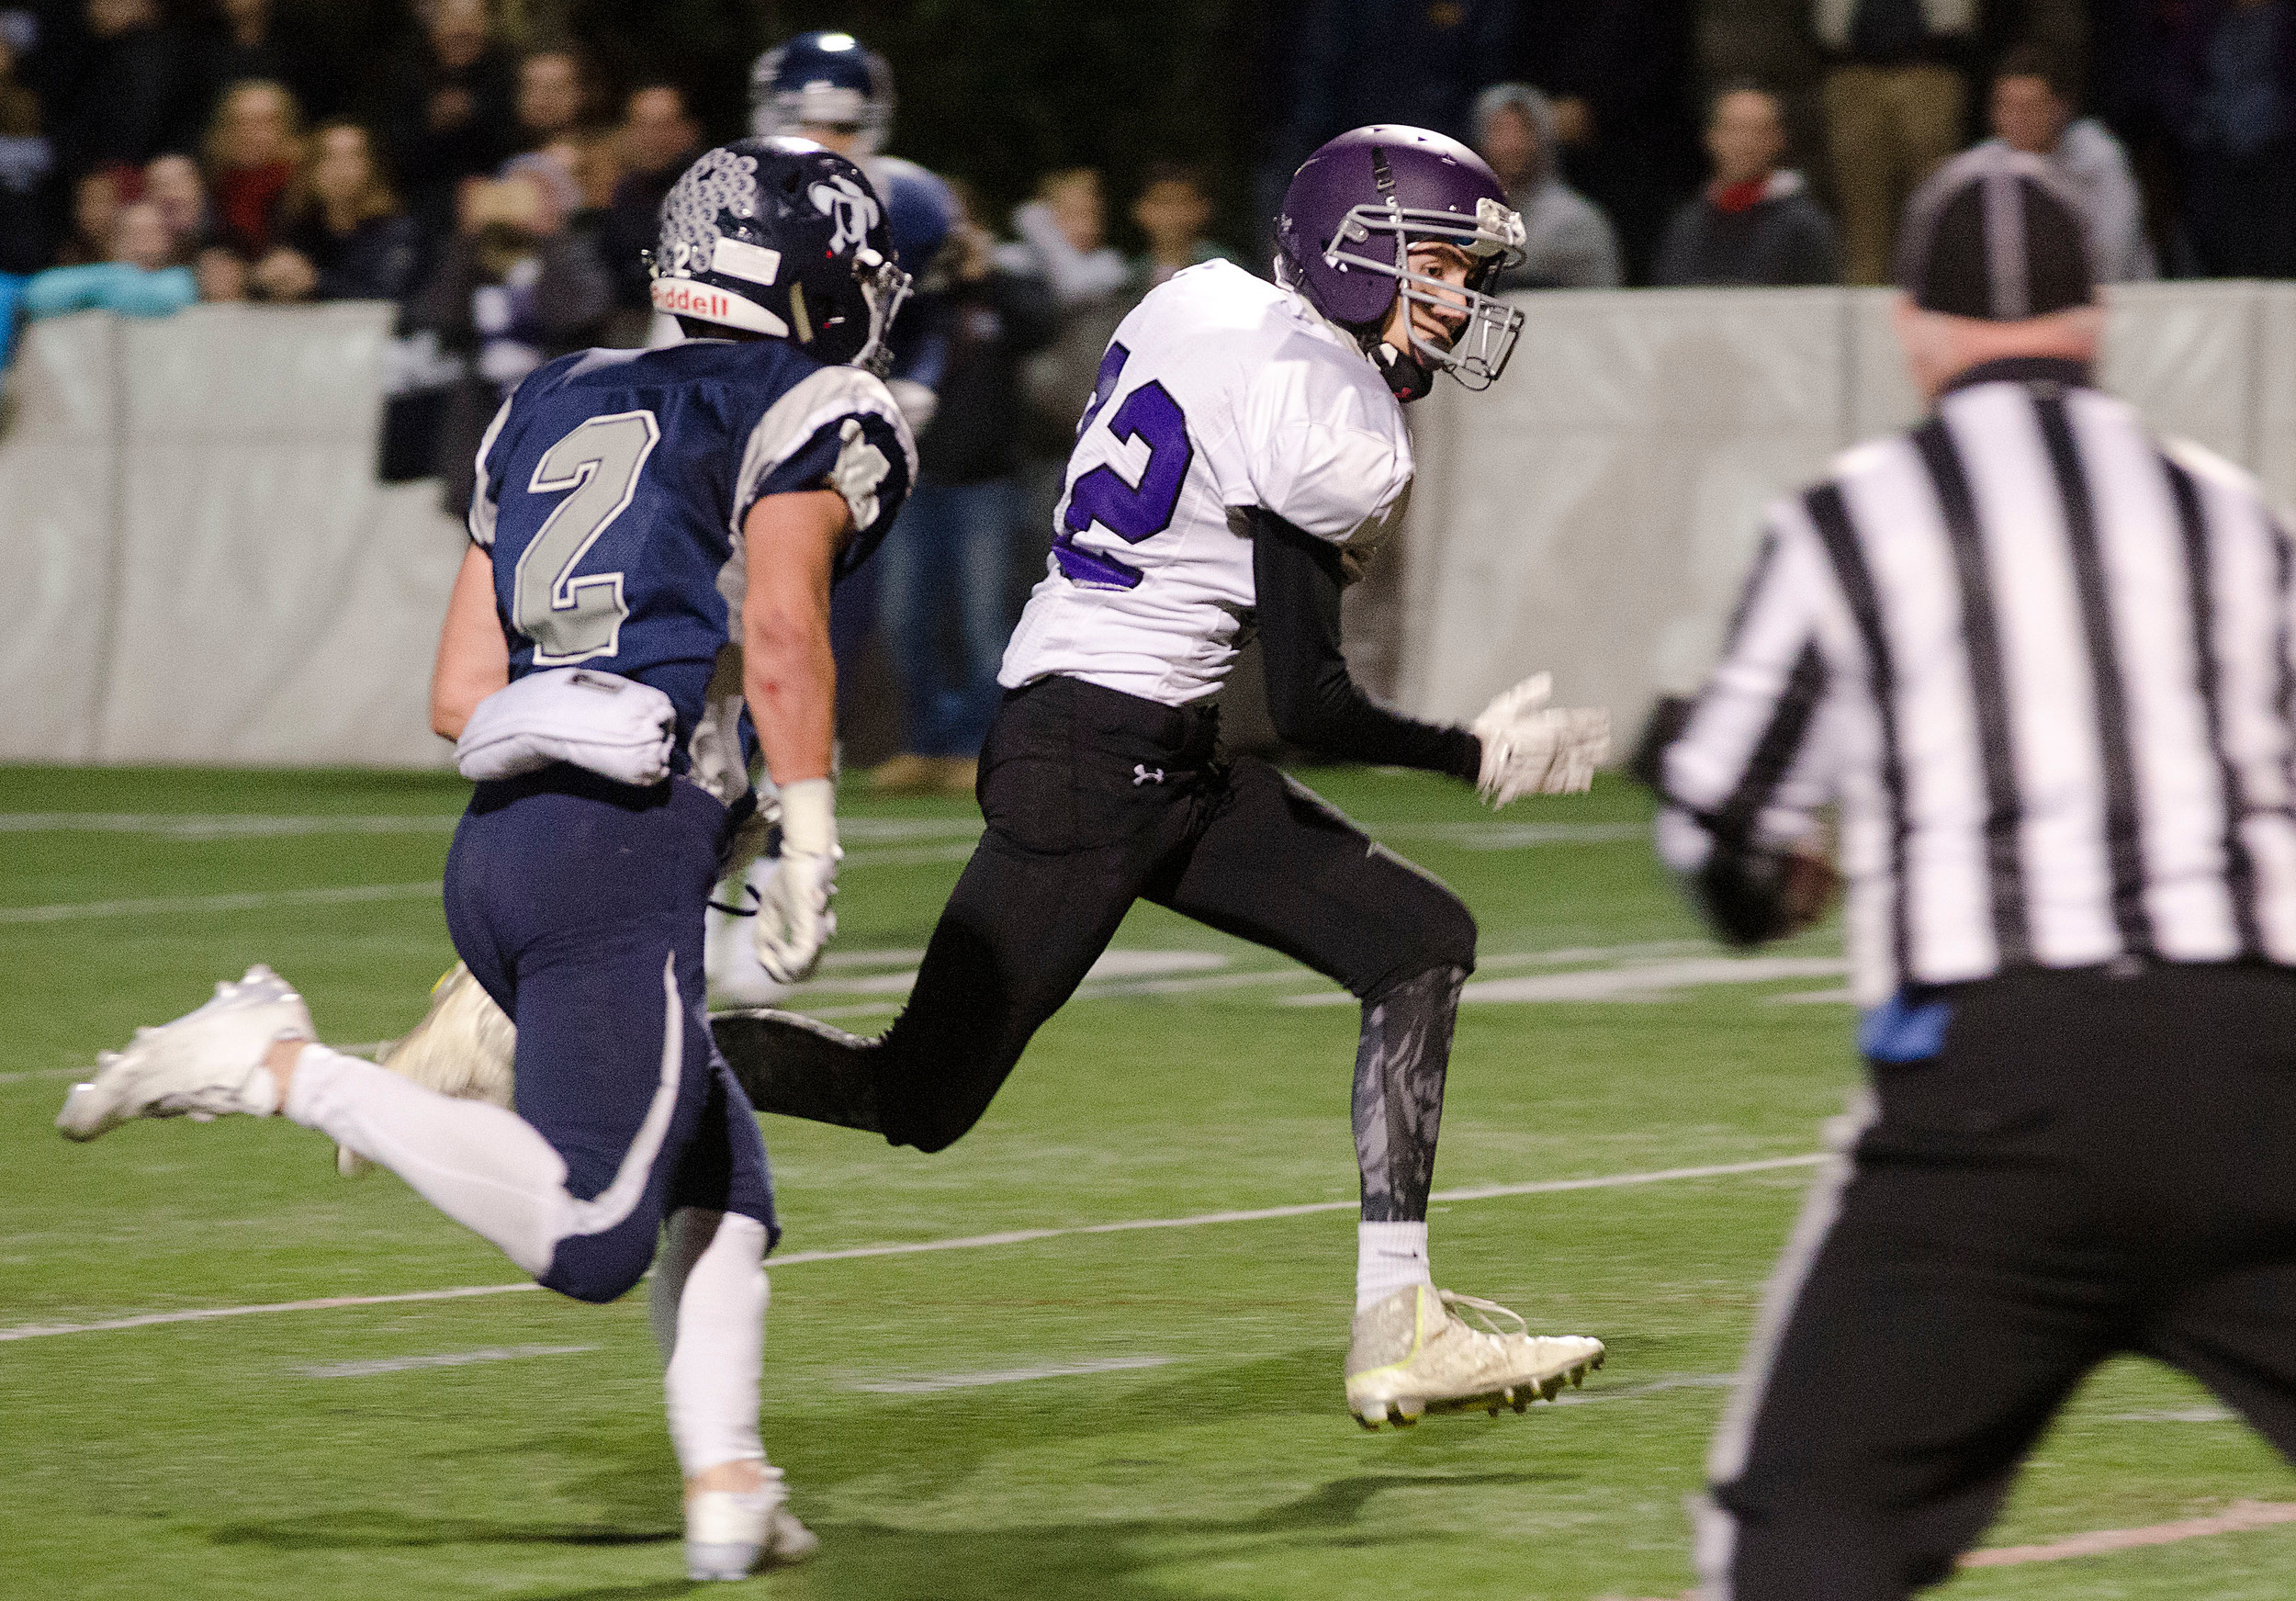 Huskies receiver Zach Burke runs to the end zone for a touchdown after catching a pass from quarterback Vincent Berretto in the first quarter.